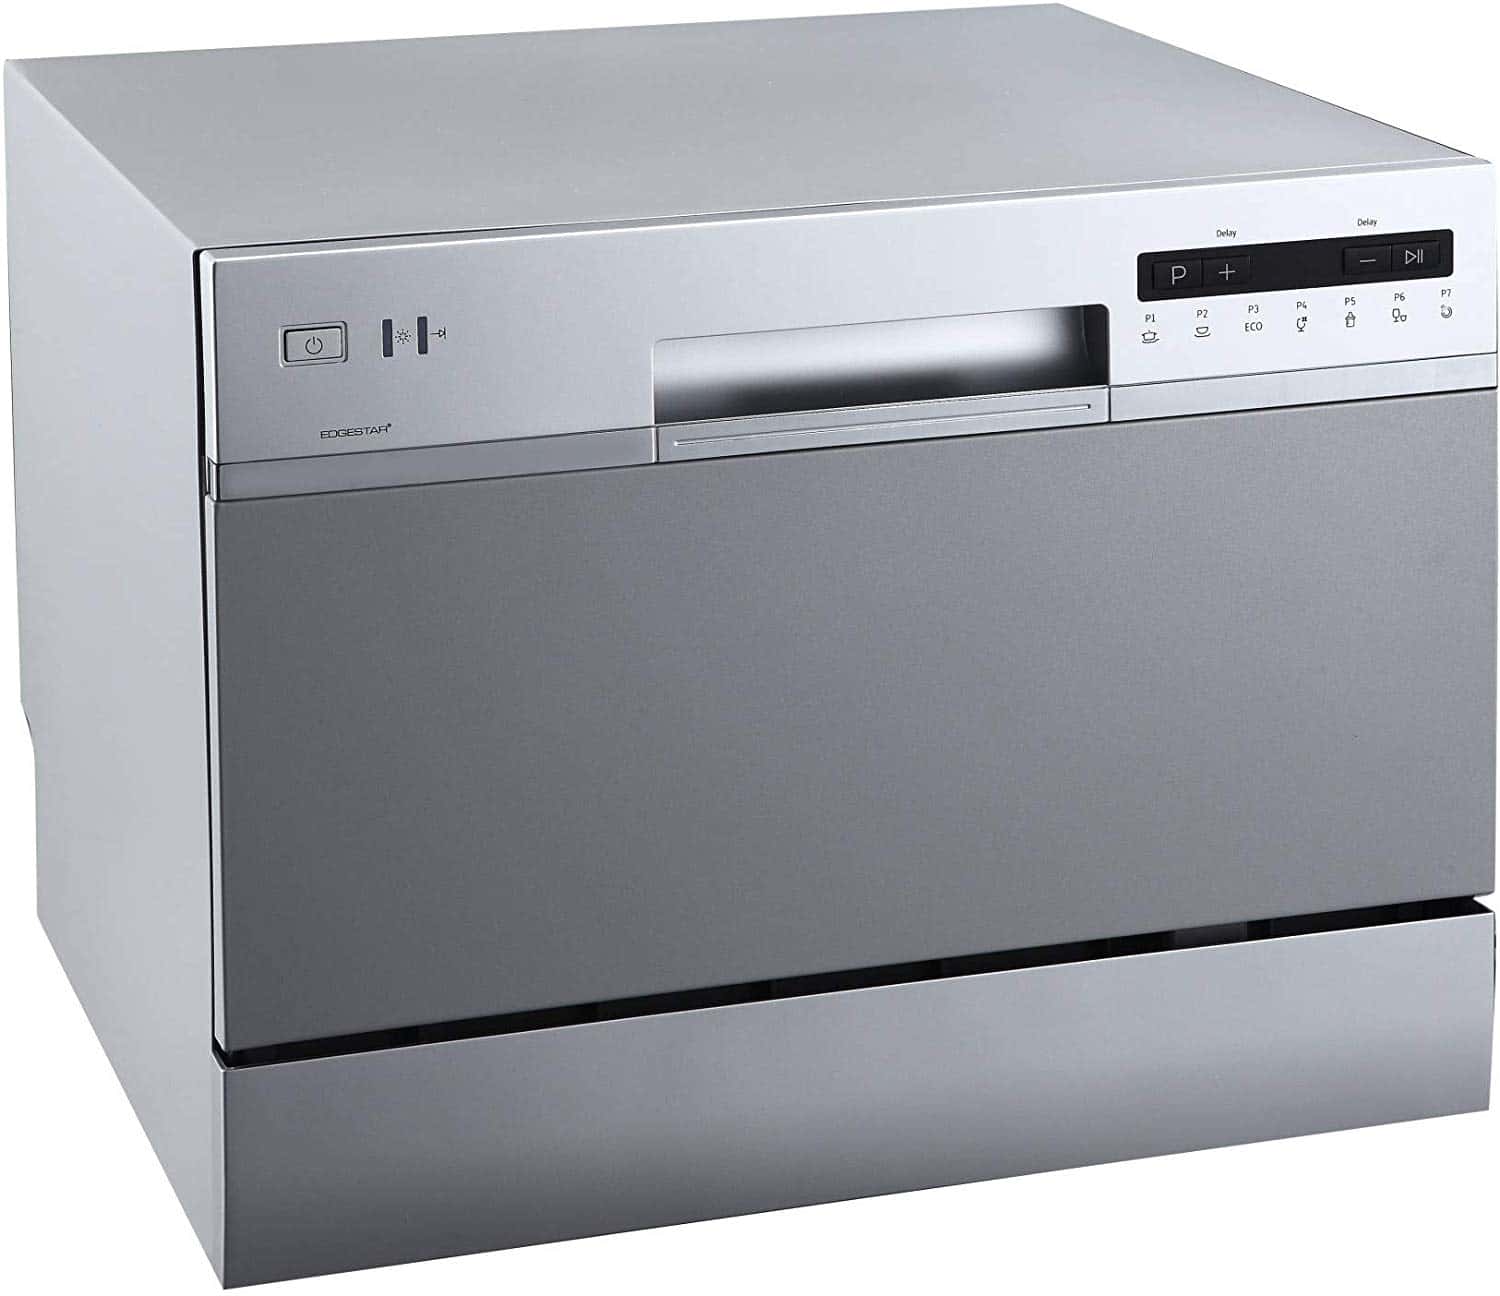 The 10 Best Small Dishwashers of 2020